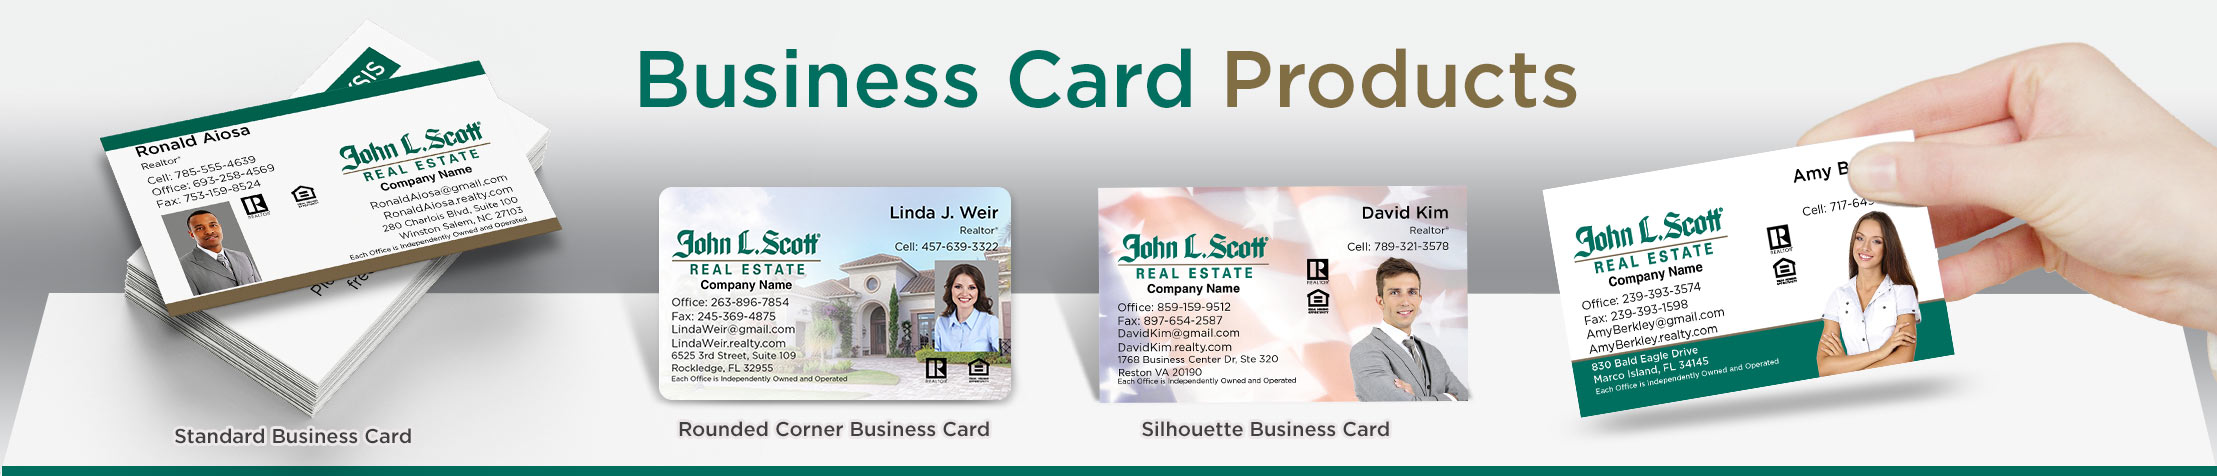 John L. Scott Real Estate Business Card Products - John L. Scott Real Estate - Unique, Custom Business Cards Printed on Quality Stock with Creative Designs for Realtors | BestPrintBuy.com